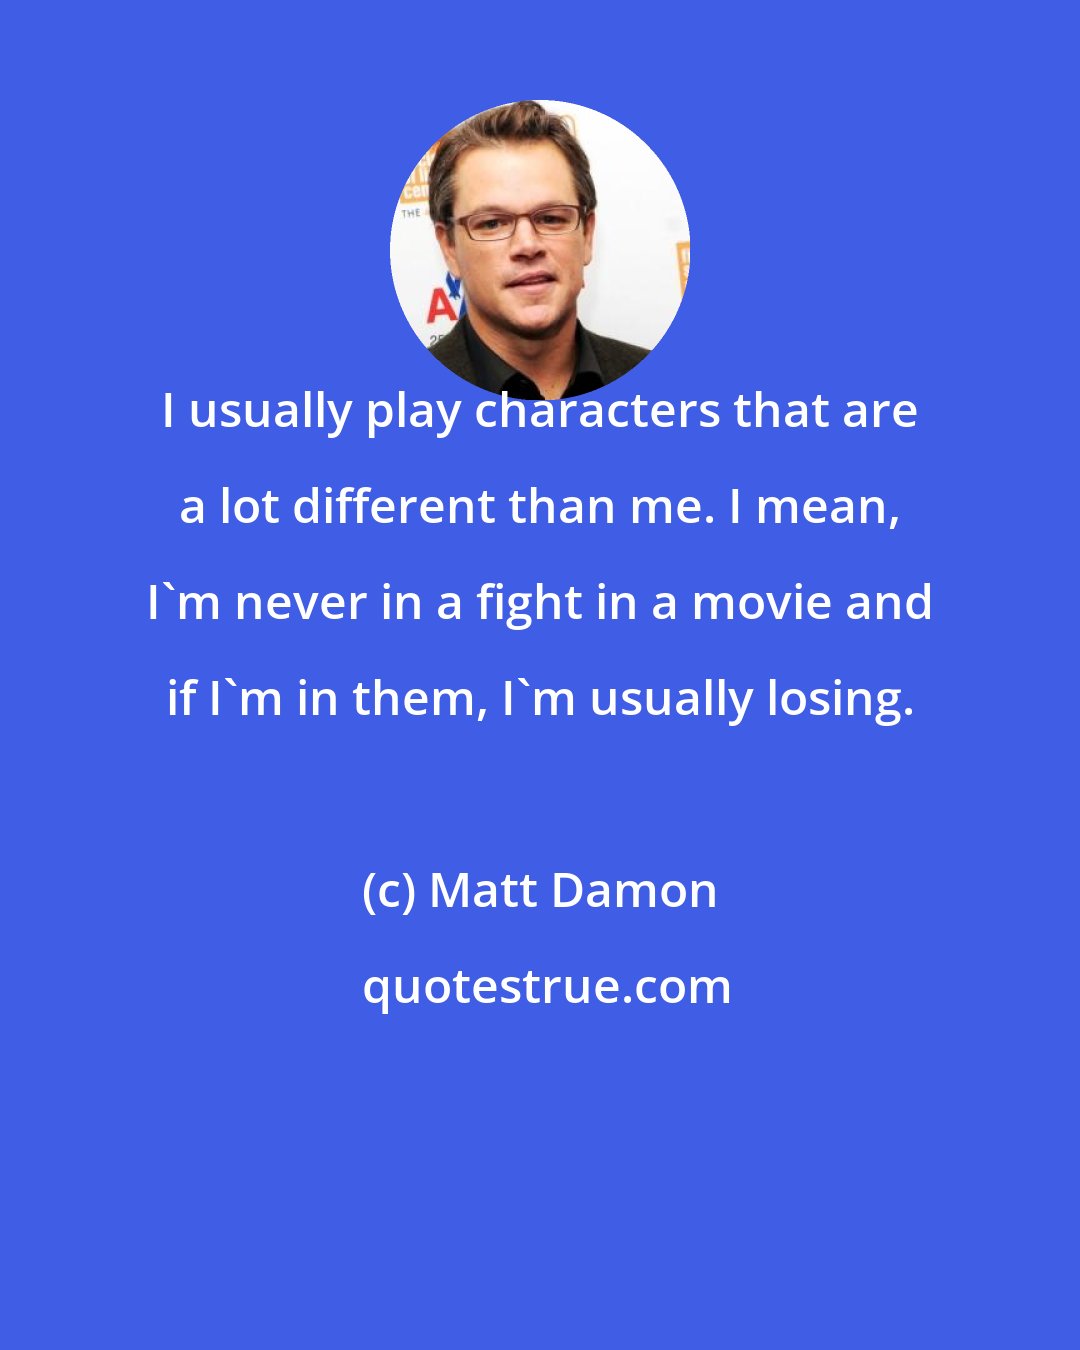 Matt Damon: I usually play characters that are a lot different than me. I mean, I'm never in a fight in a movie and if I'm in them, I'm usually losing.